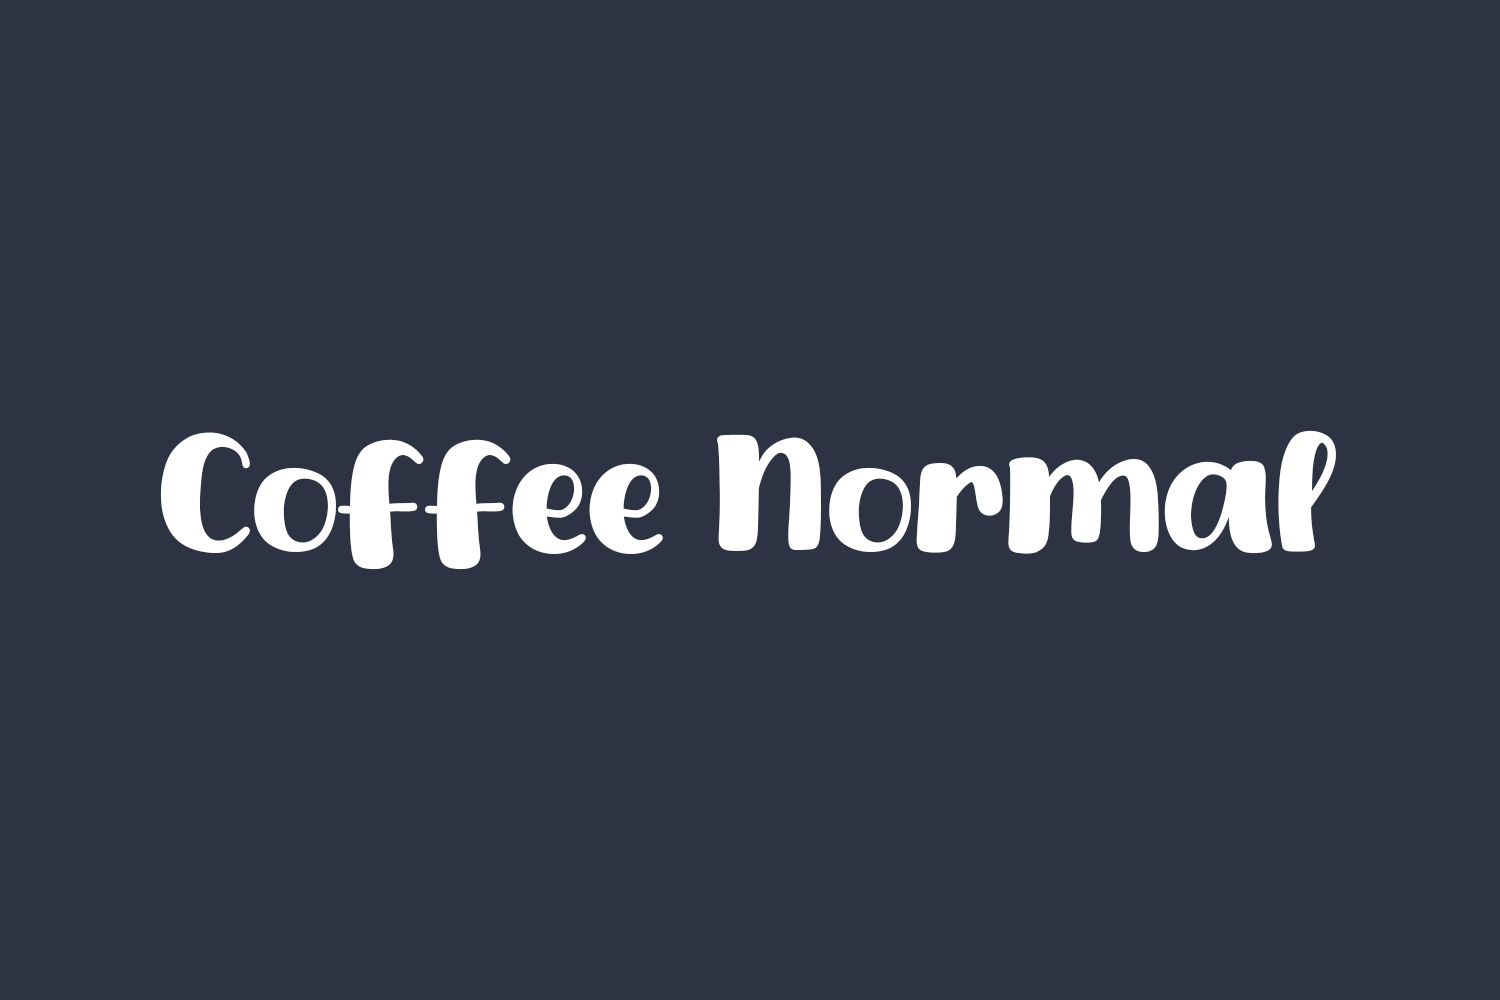 Free Coffee Normal Font